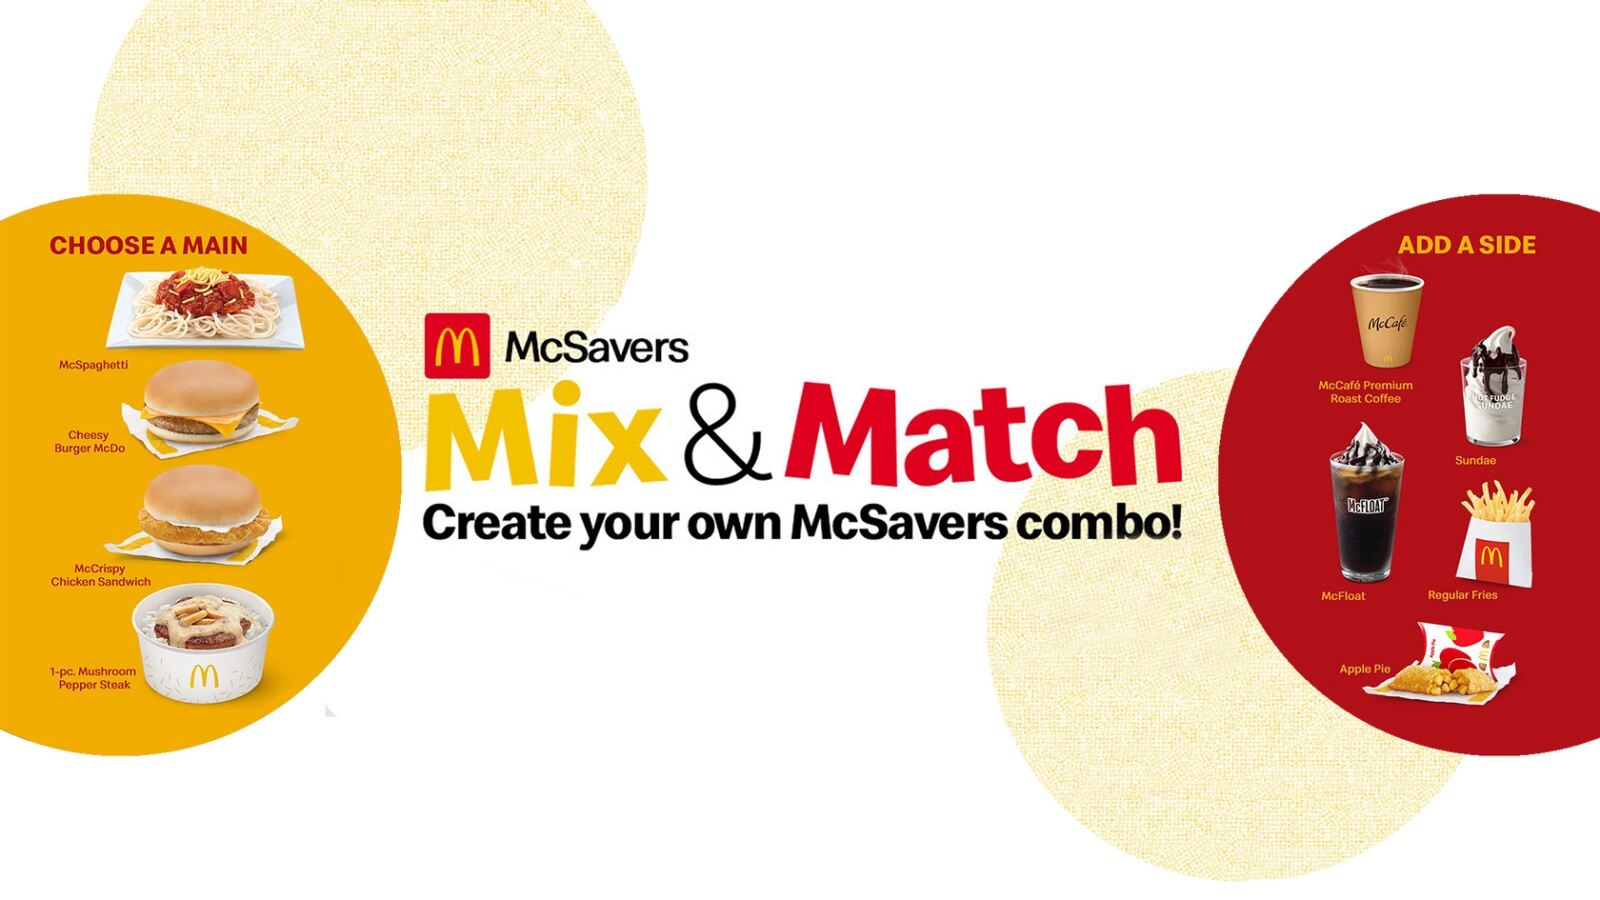 Up late Celebrating with friends? McSavers Mix & Match is your next go-to quick fix for all occasions - SCOUT